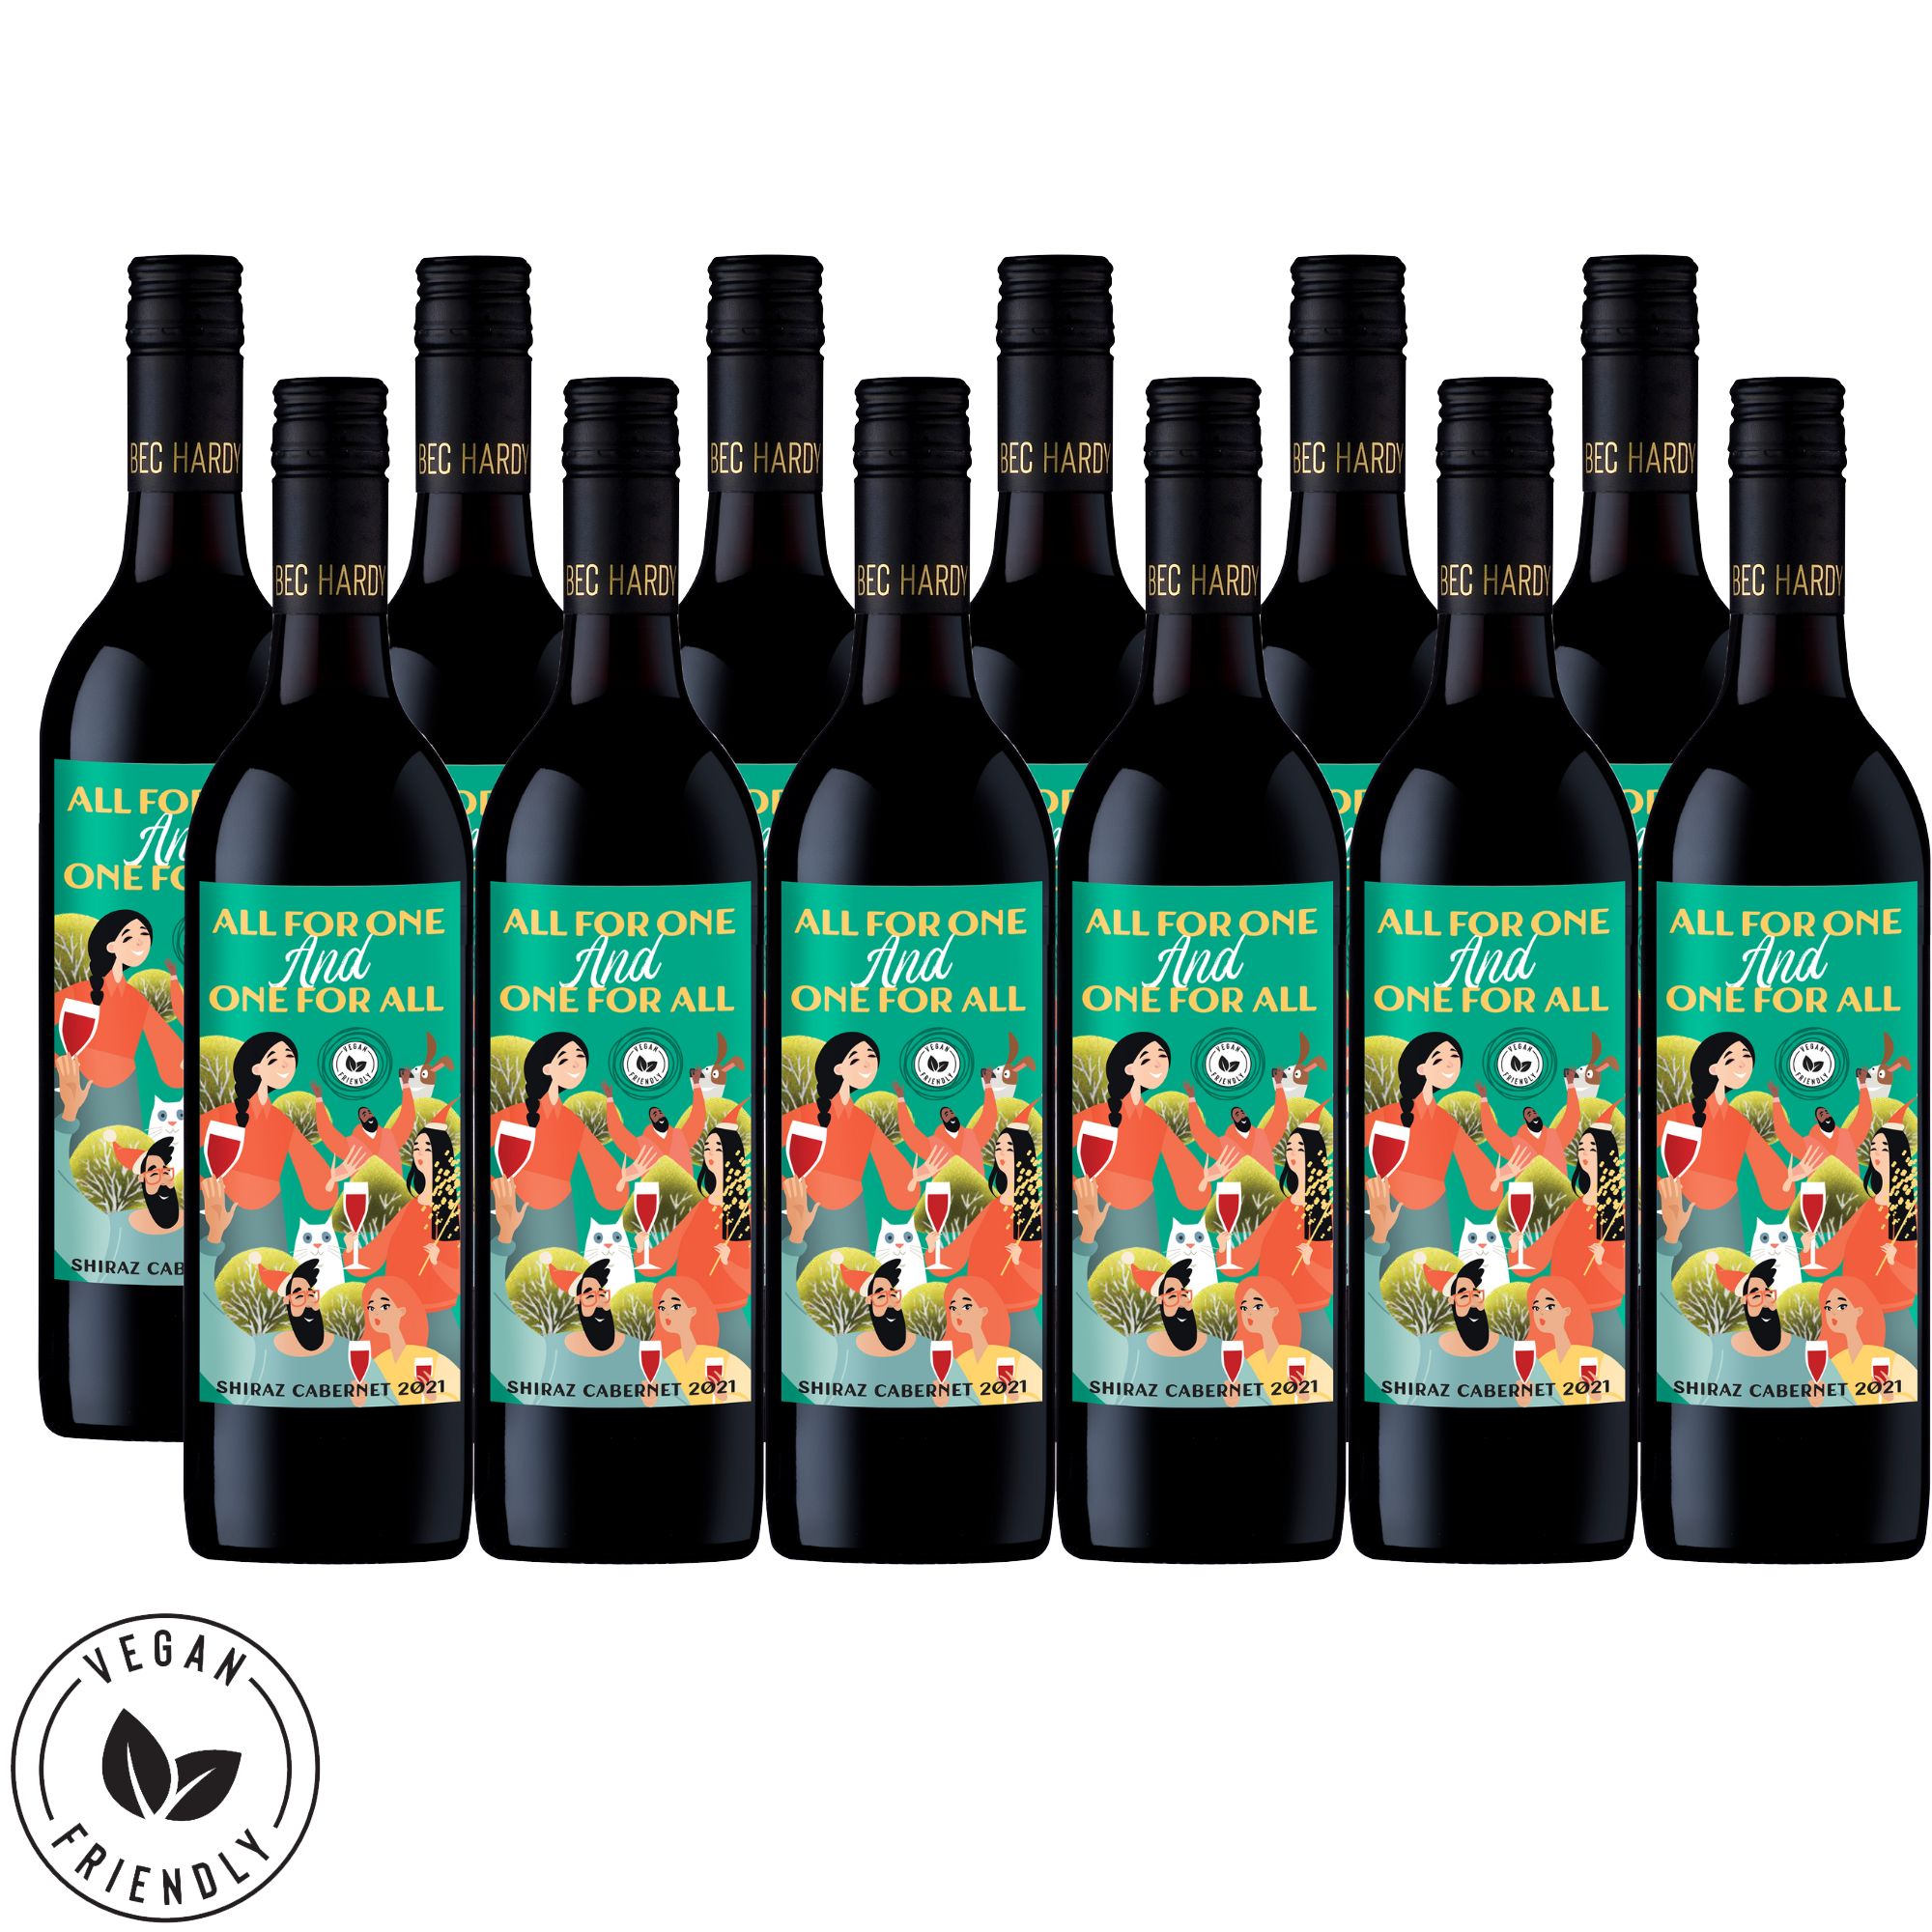 All for One And One For All Langhorne Creek Shiraz Cabernet 2021 12PK